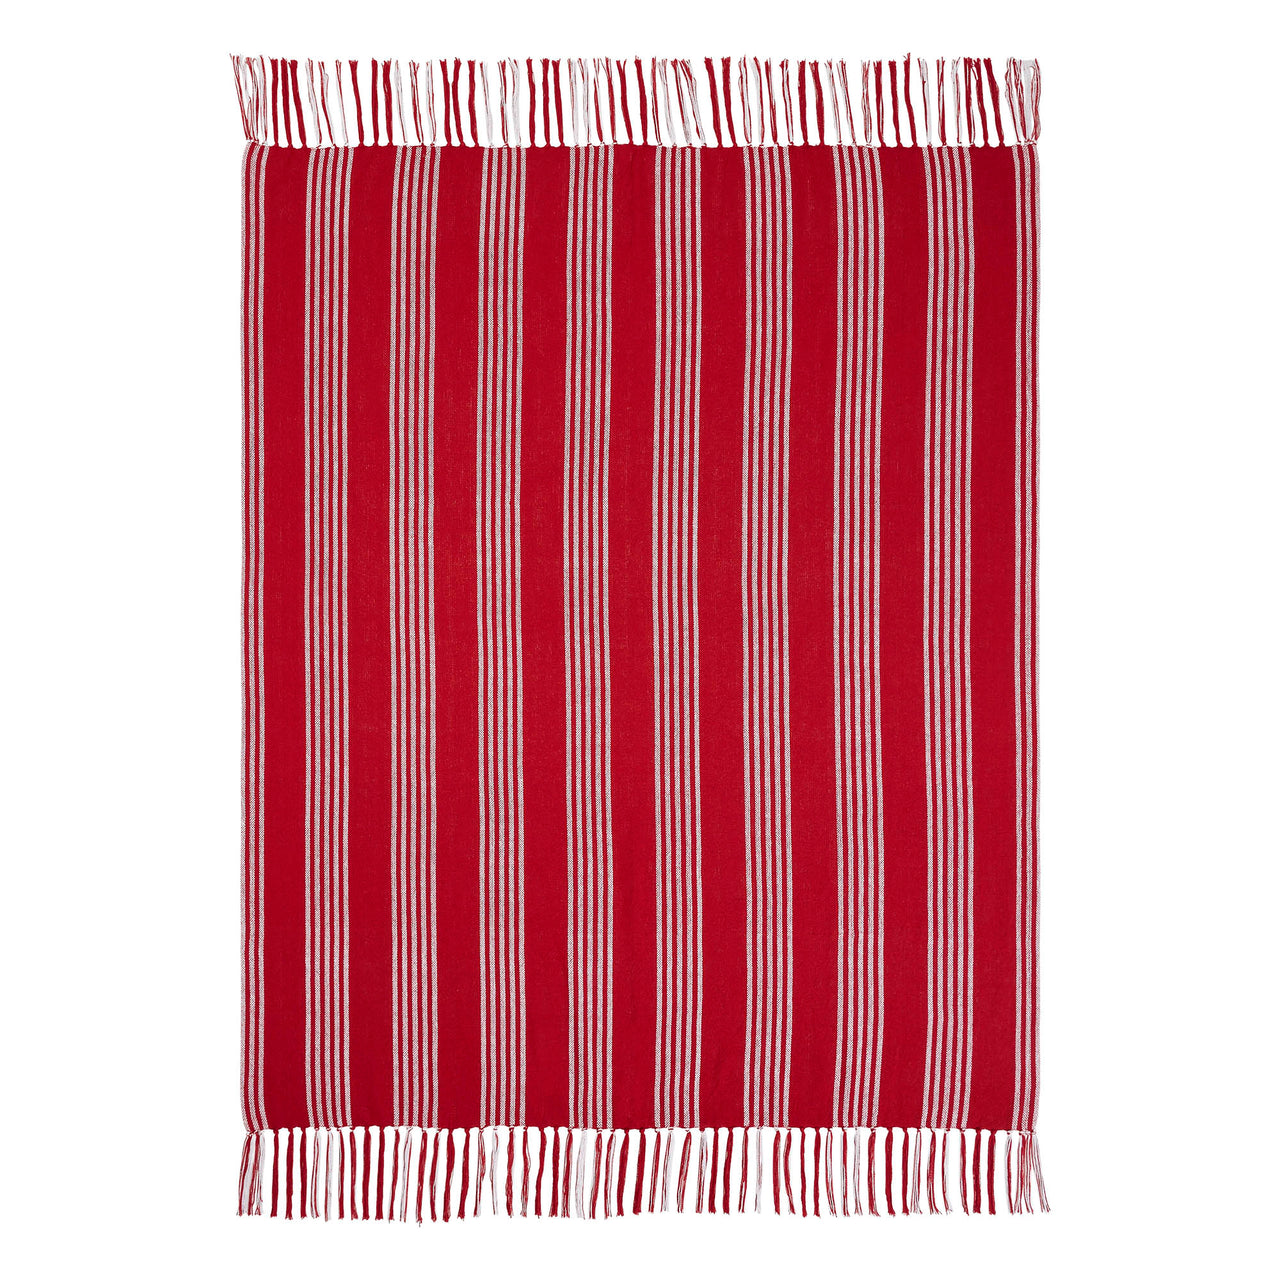 Arendal Red Stripe Woven Throw 50"x60" VHC Brands